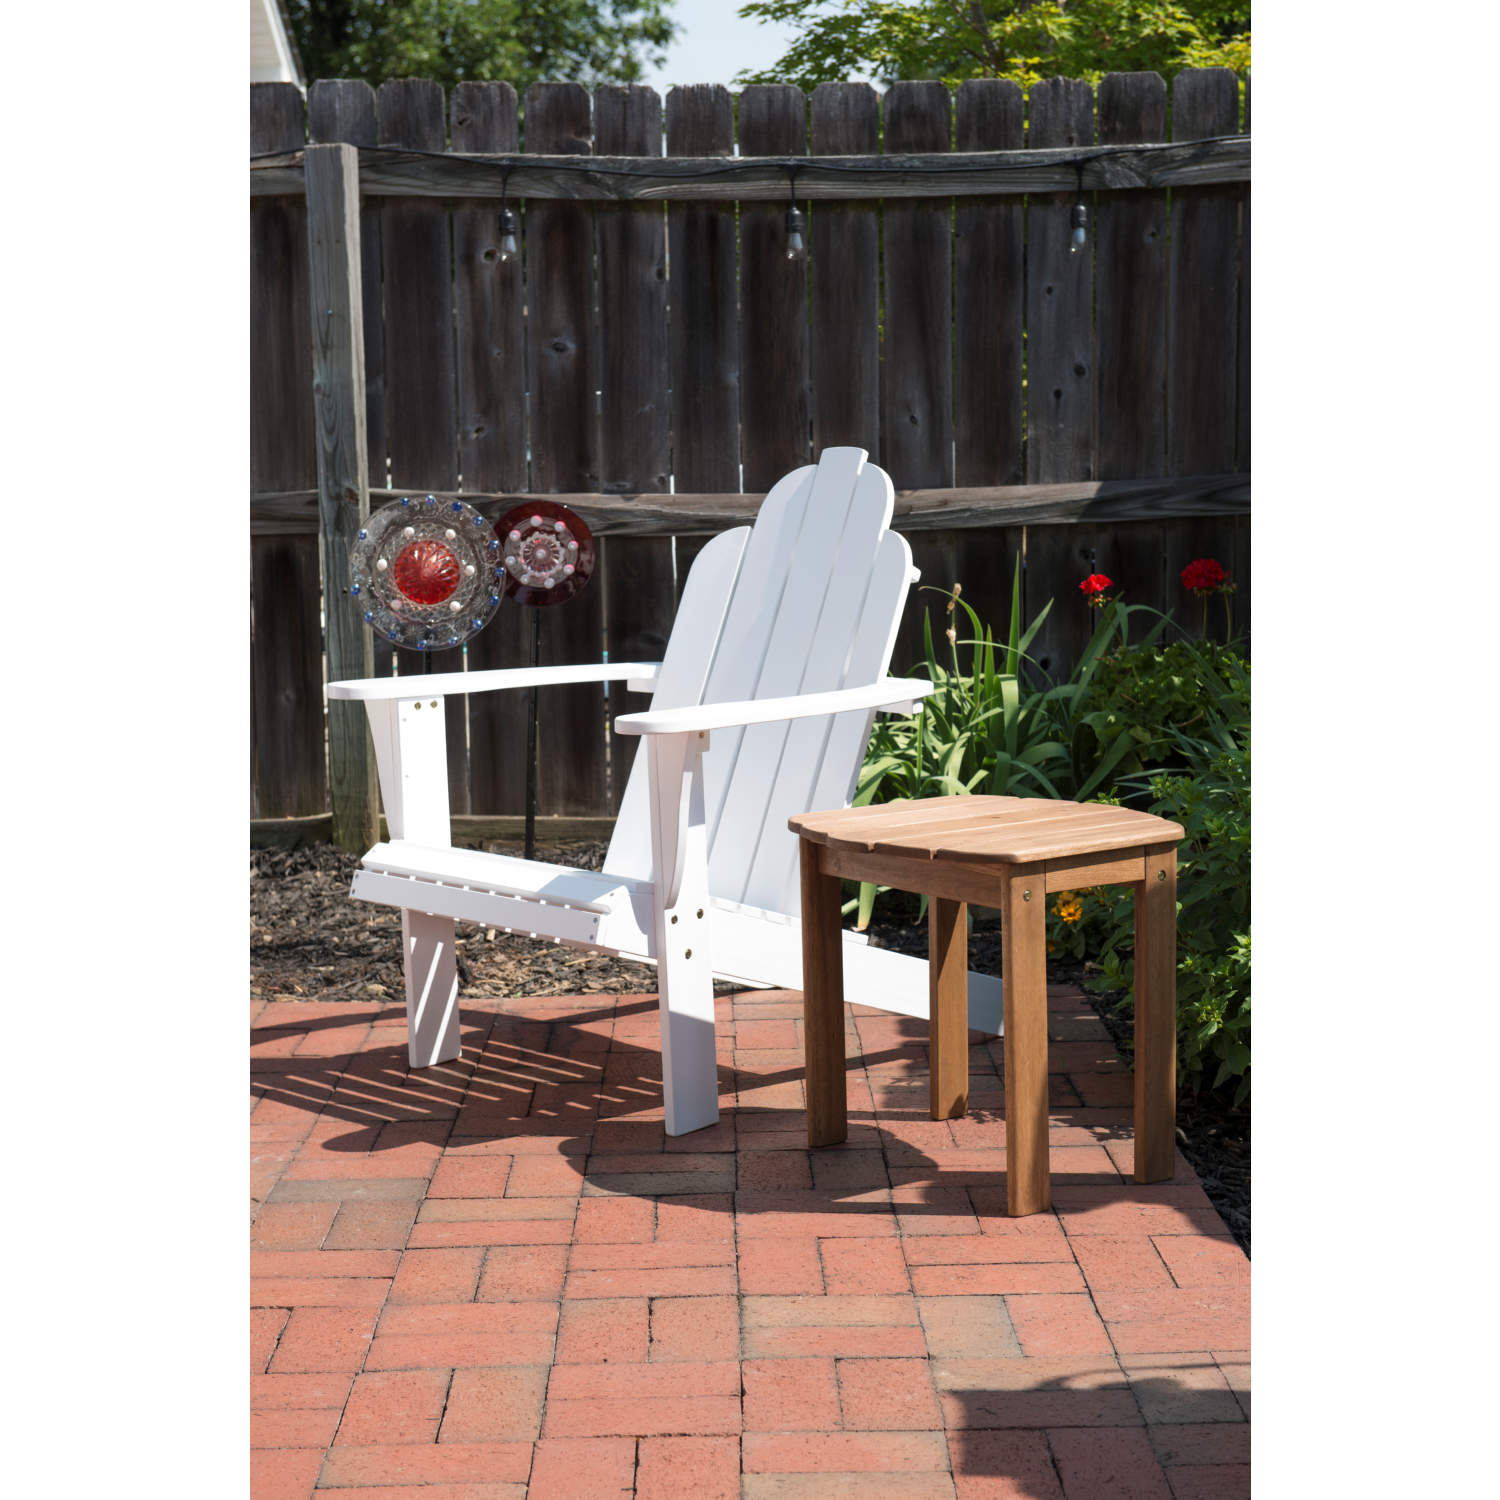 Chaise Lounge in White by Bar Harbor Spice Islands BHCL-W - Rattan